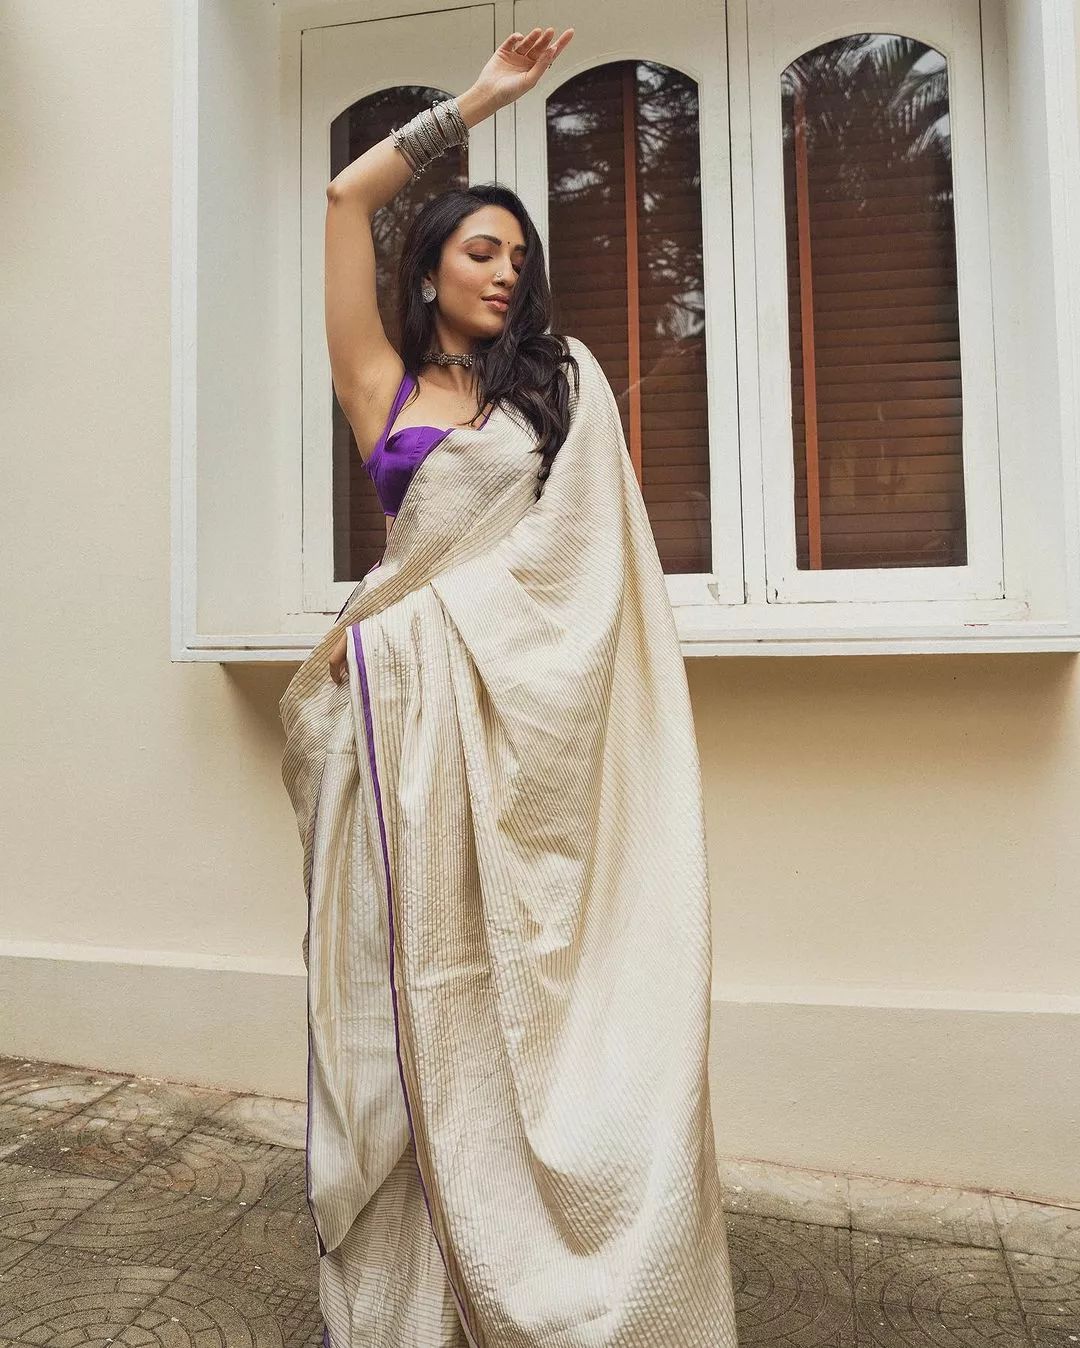 Backless Bliss: Neha Shetty's Saree, Navel Chain, and a Dash of Elegance